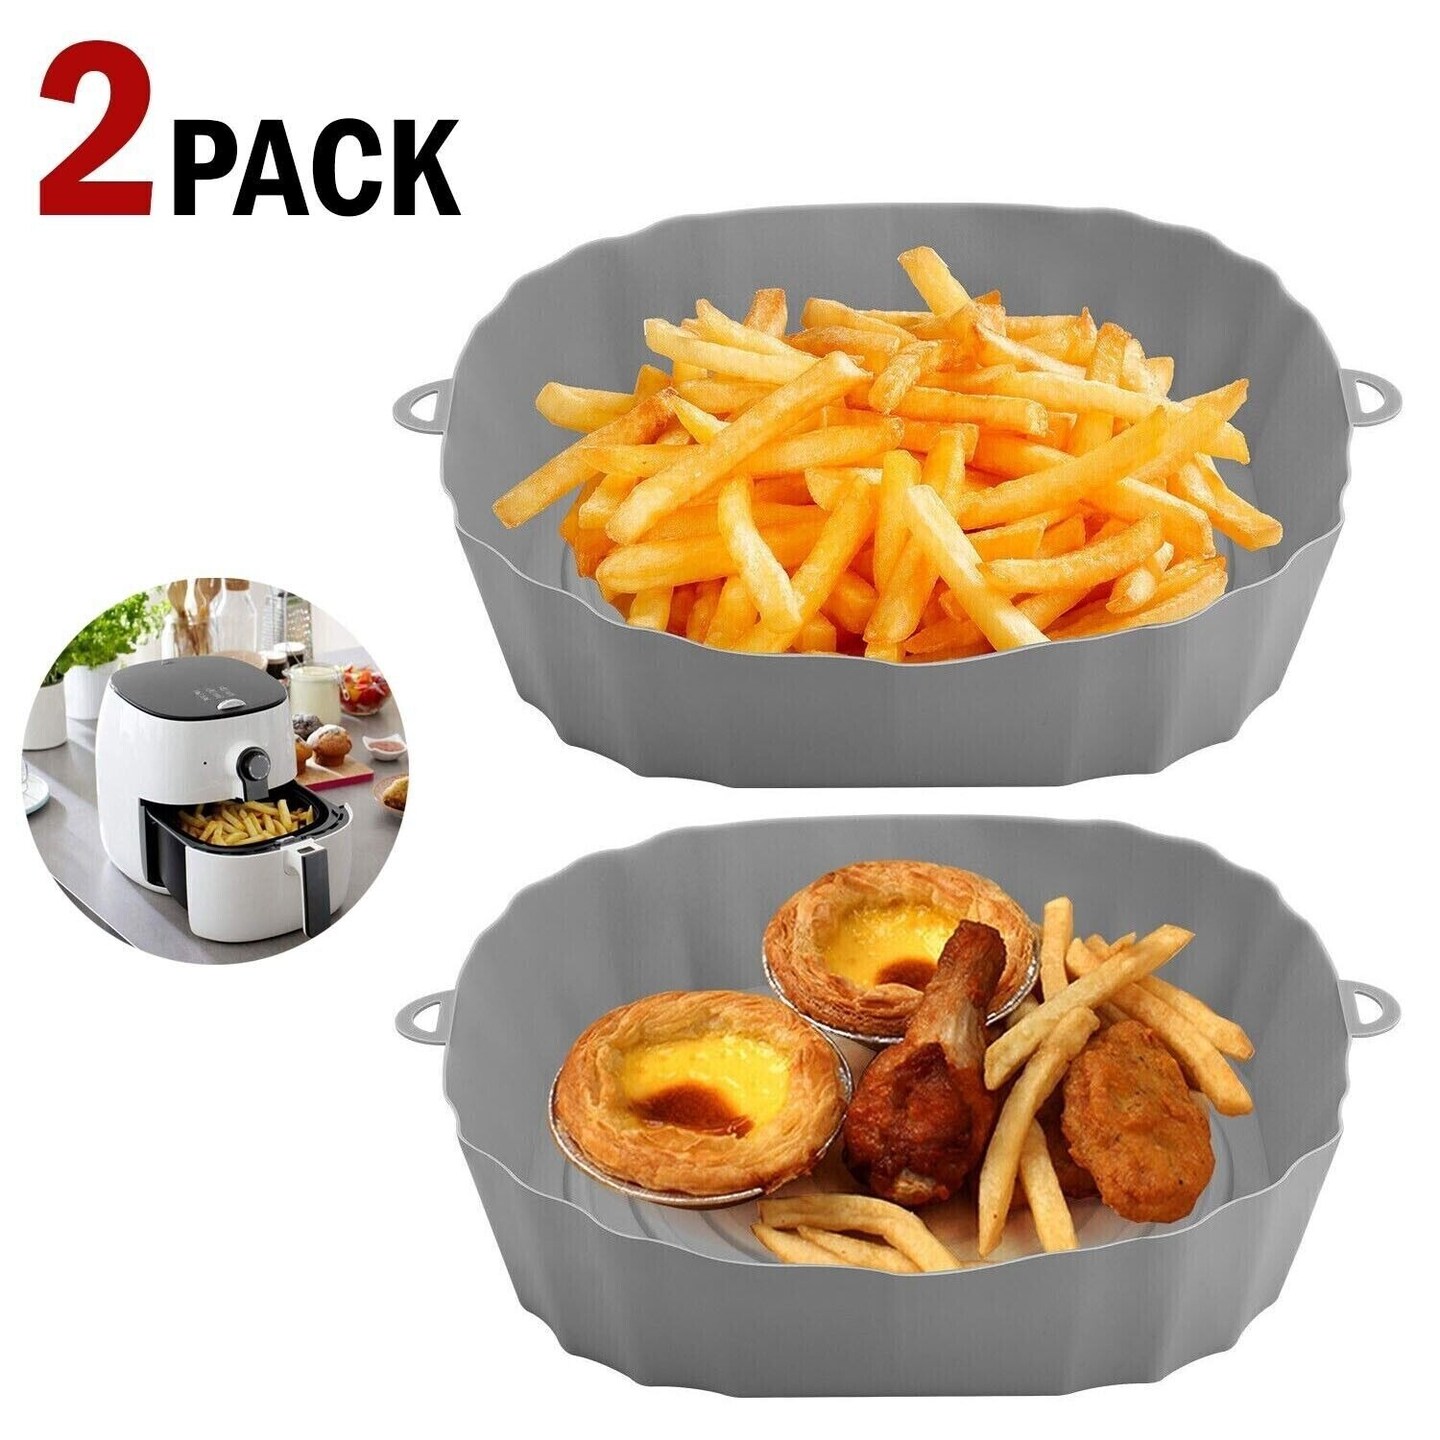 2 Non-Stick Silicone Pot Baskets Liners for Air Fryer Oven